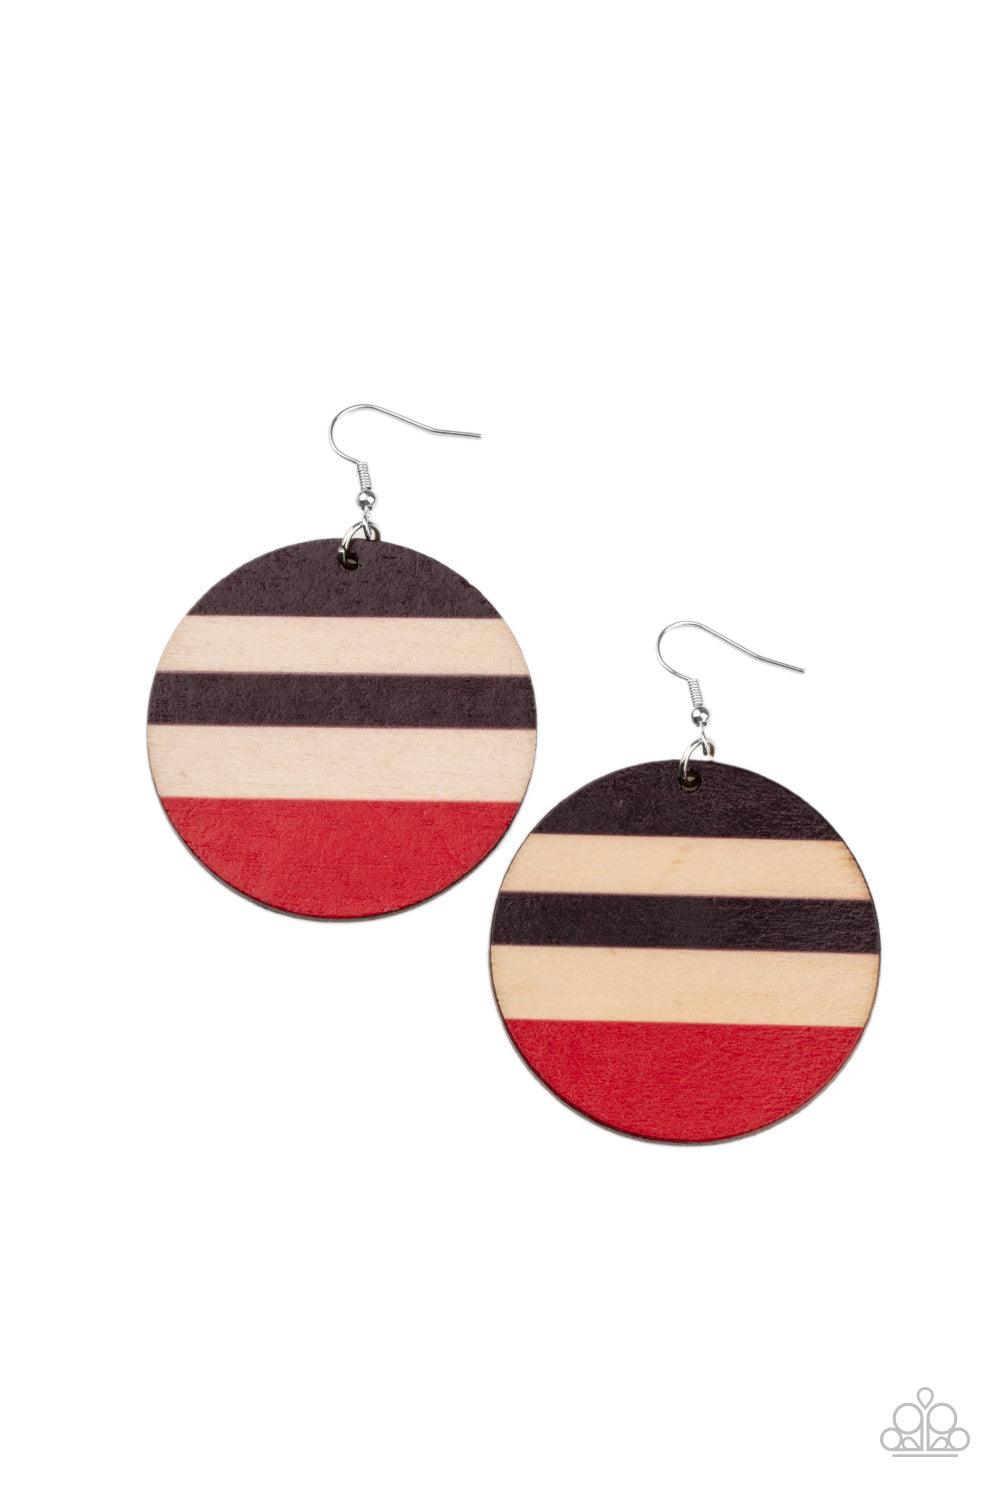 Paparazzi Accessories Yacht Party - Red The front of a shiny wooden disc is striped in purplish-brown and red accents, creating a colorful summery look. Earring attaches to a standard fishhook fitting. Sold as one pair of earrings. Jewelry